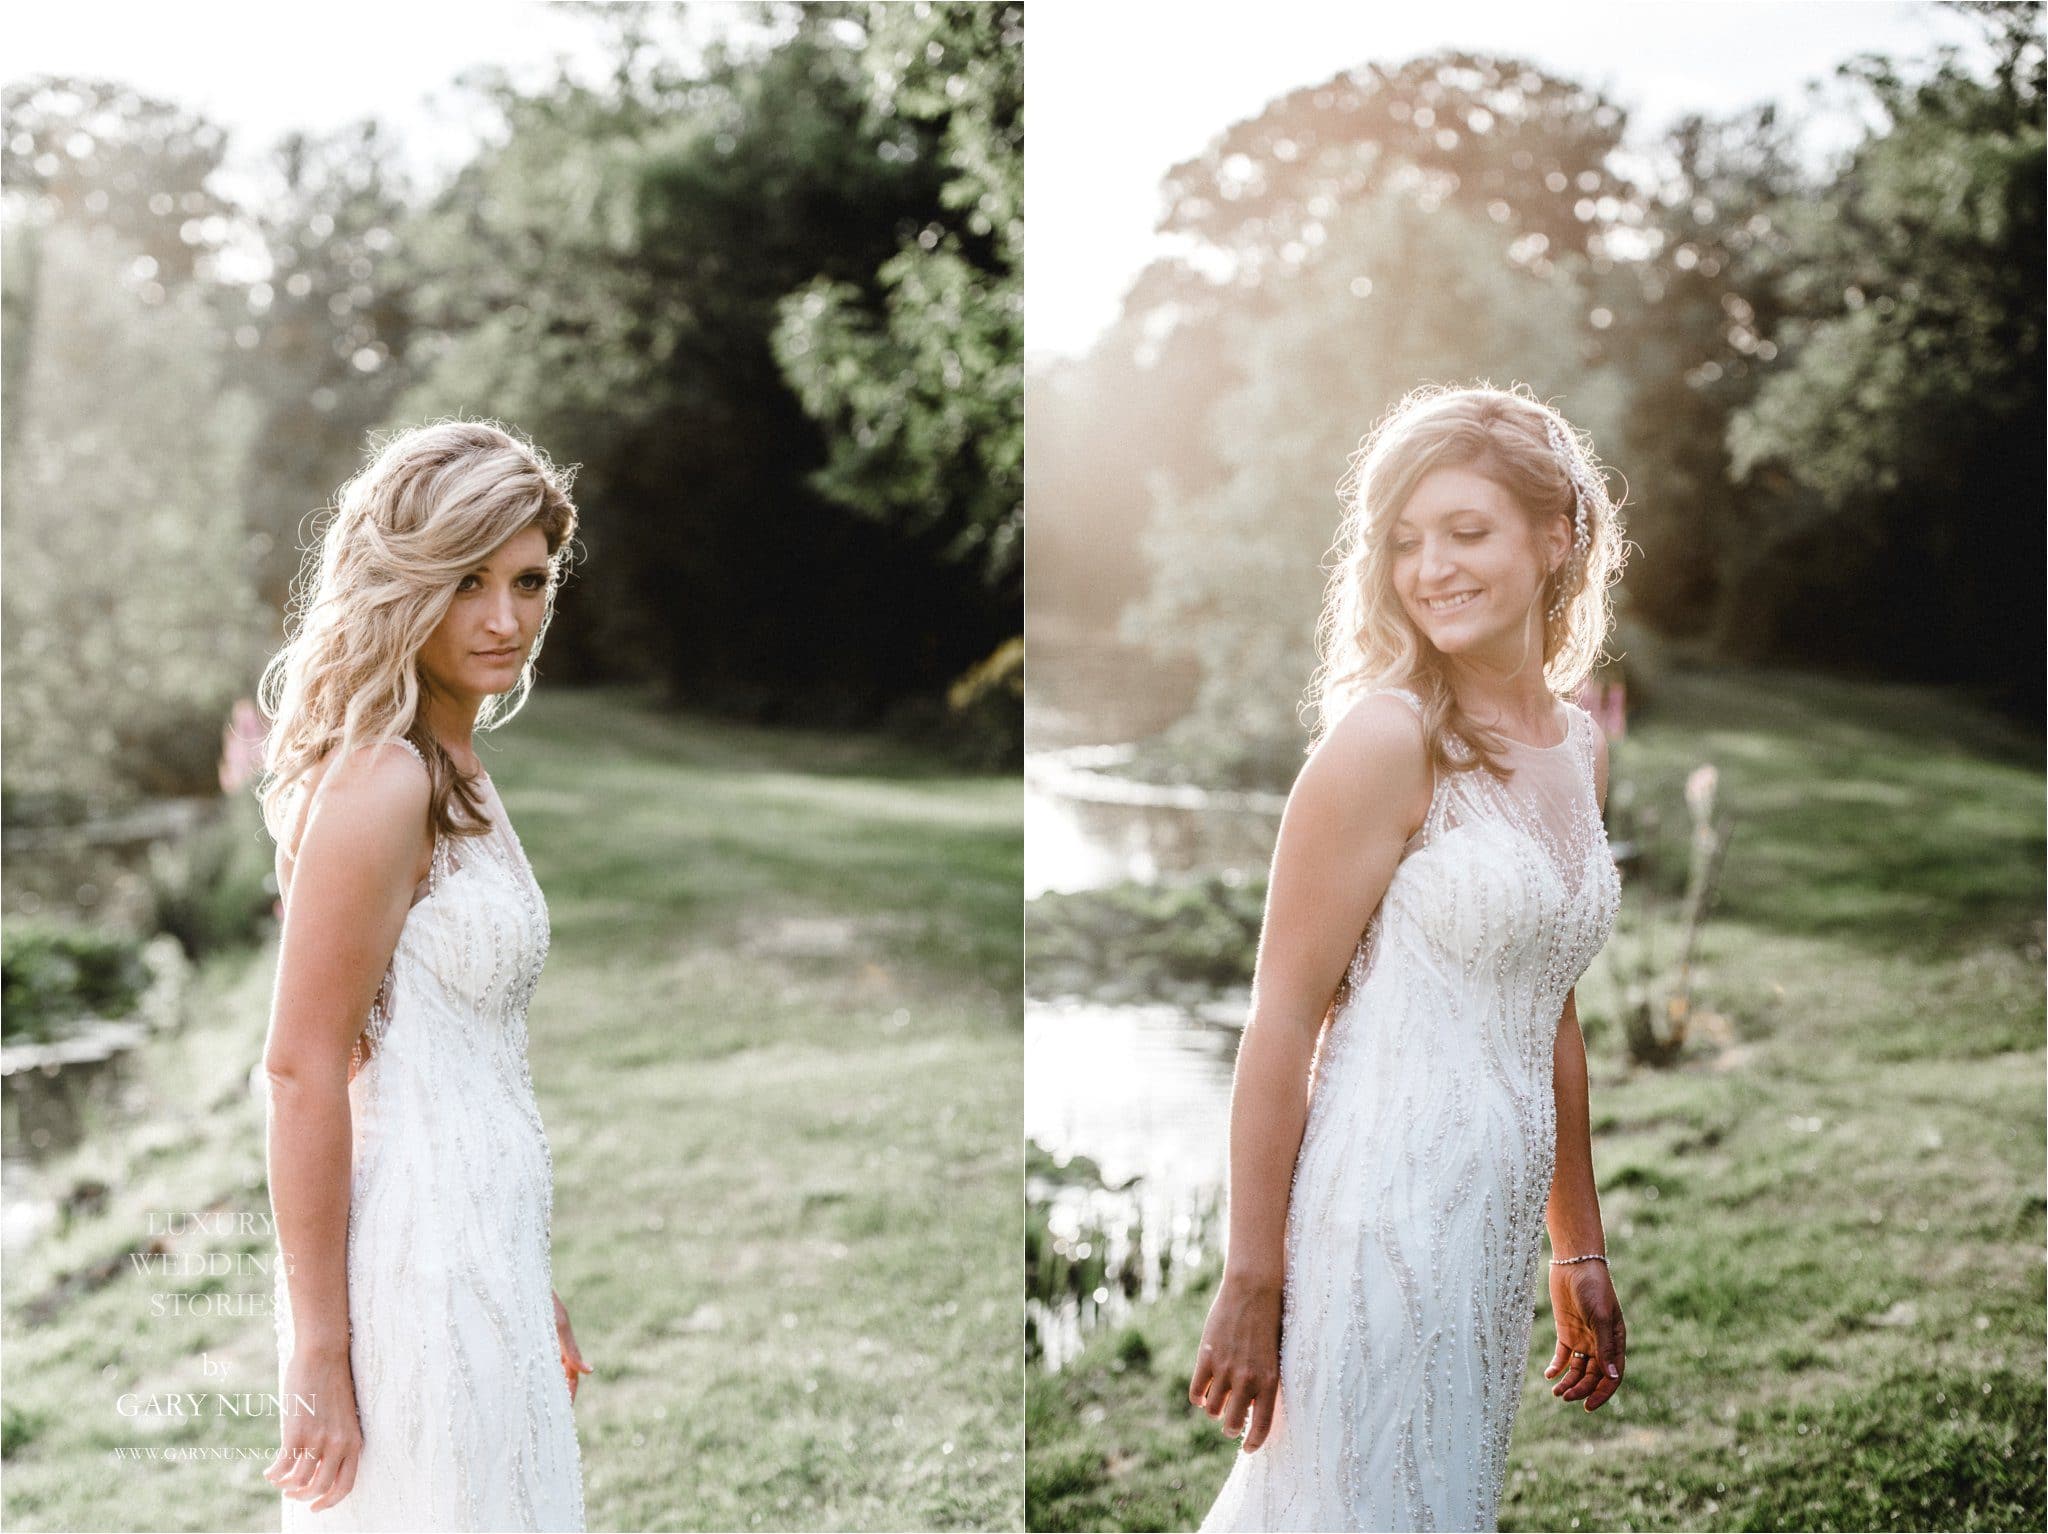 Why hire a professional wedding photographer, bellows mill